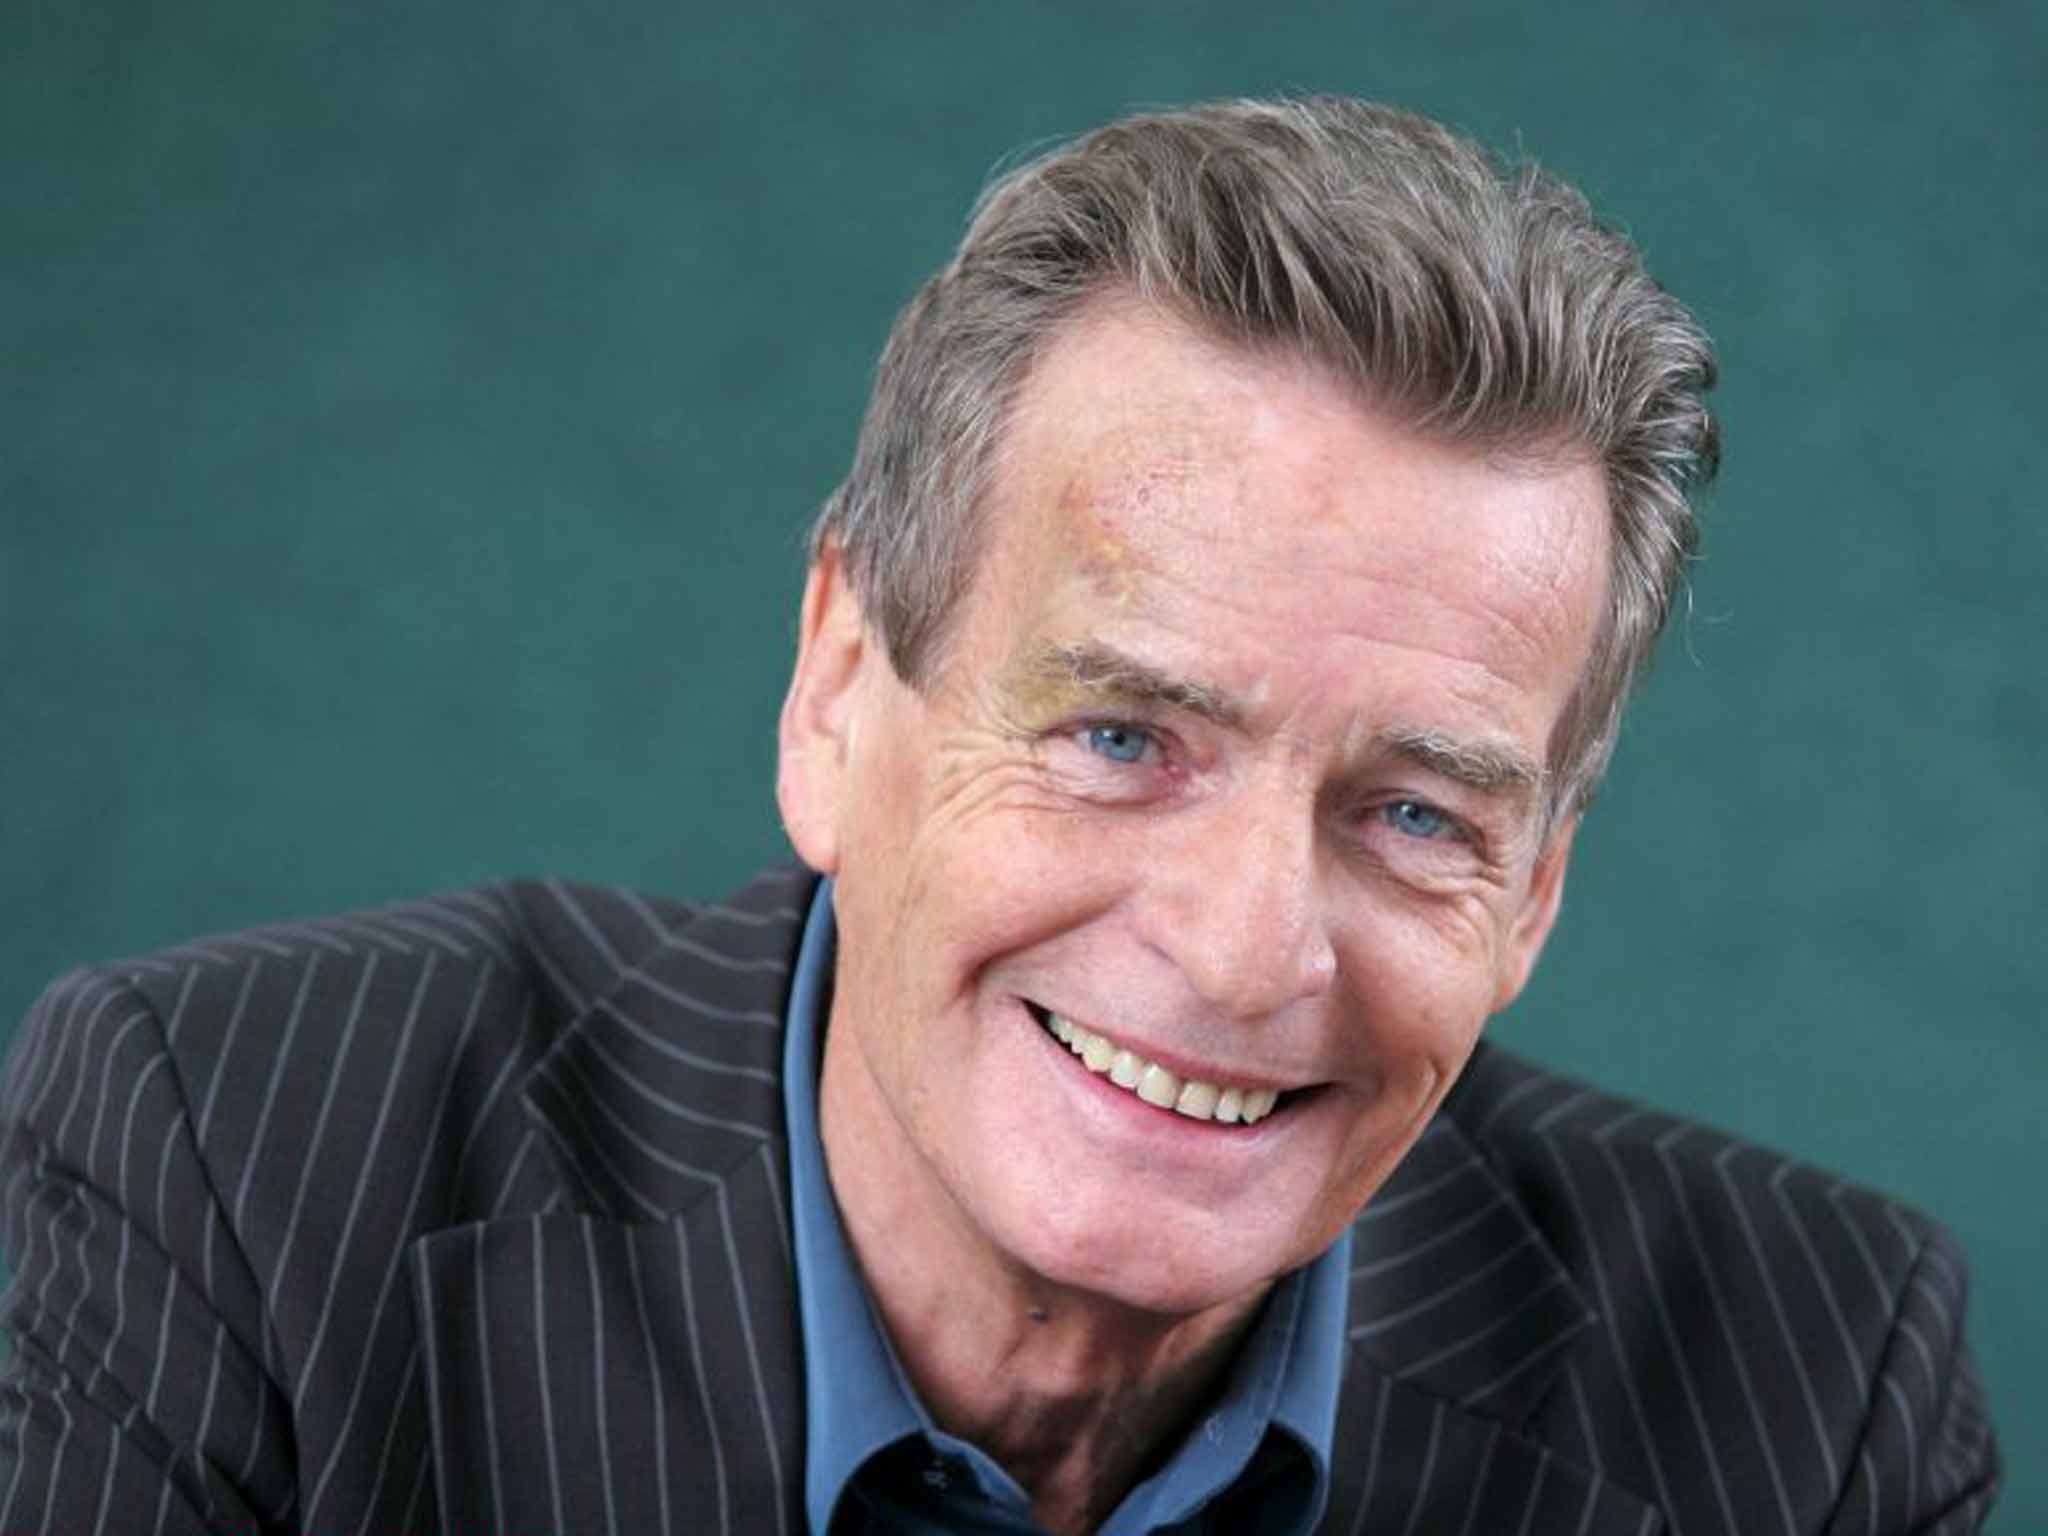 McIlvanney: 'I've been very lucky in my attempts to write,' he said. His first novel was rejected, 'then someone told me there’s a thing called an agent, and I got an agent...'